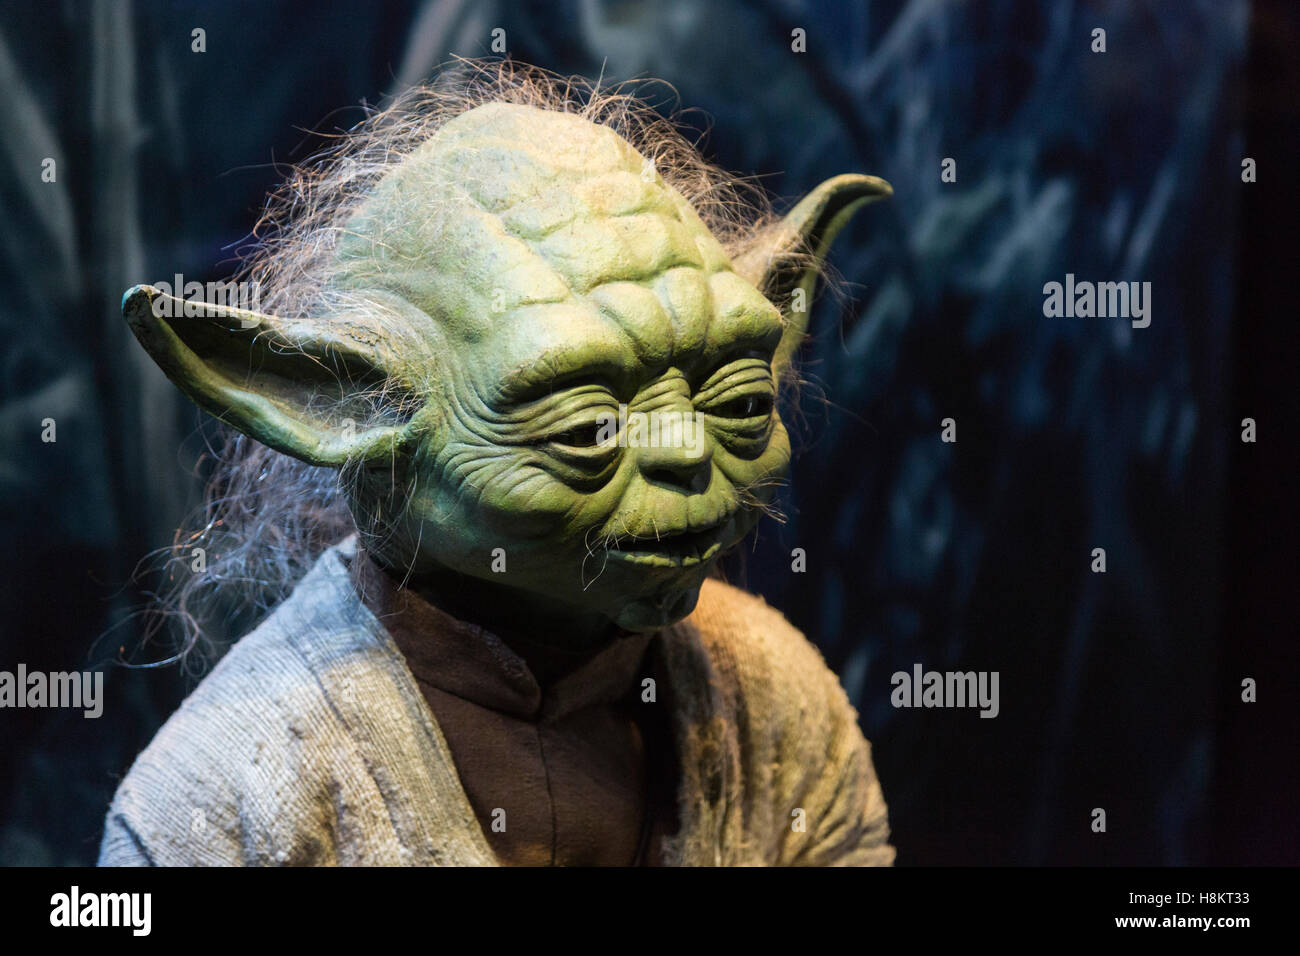 London, UK. 15 November 2016. Yoda figure in a display case. The groundbreaking exhibition Star Wars Identities explores the complex notion of identity through the characters of Star Wars. Visitors are taken on an interactive identity quest and can view an exclusive collection of 200 props, models, costumes and artwork from the Star Wars film. The exhibition is open to the public from 18 November 2016 to 3 September 2017 at the O2. Credit:  Bettina Strenske/Alamy Live News Stock Photo